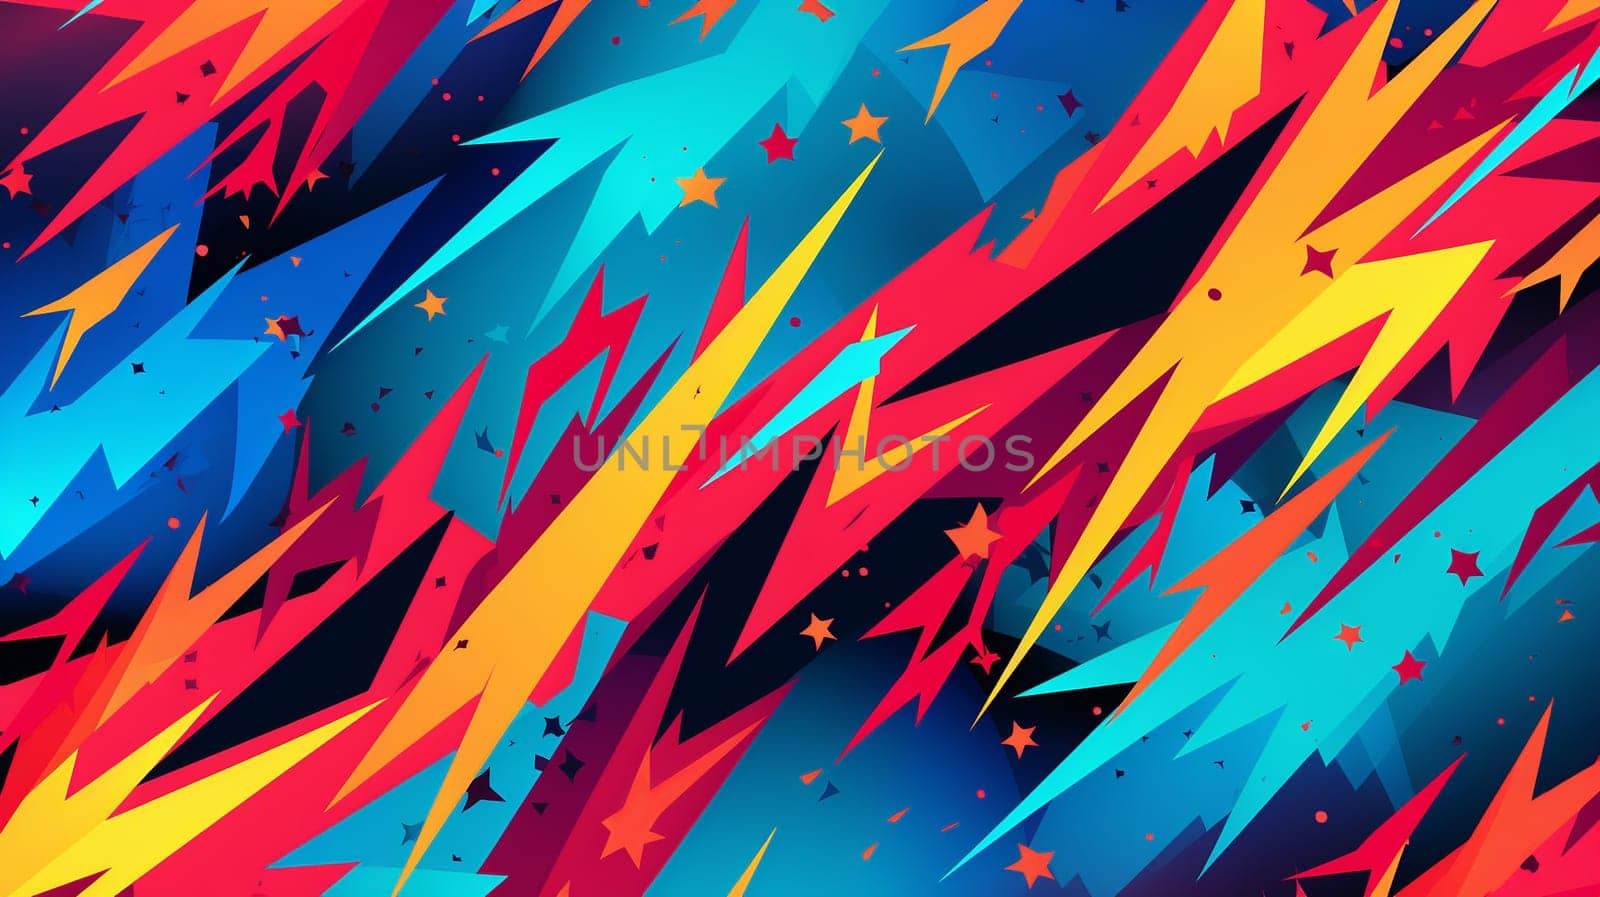 Wallpaper background, Abstract zap explosion dash line lightning bolt background , Generate AI by Mrsongrphc